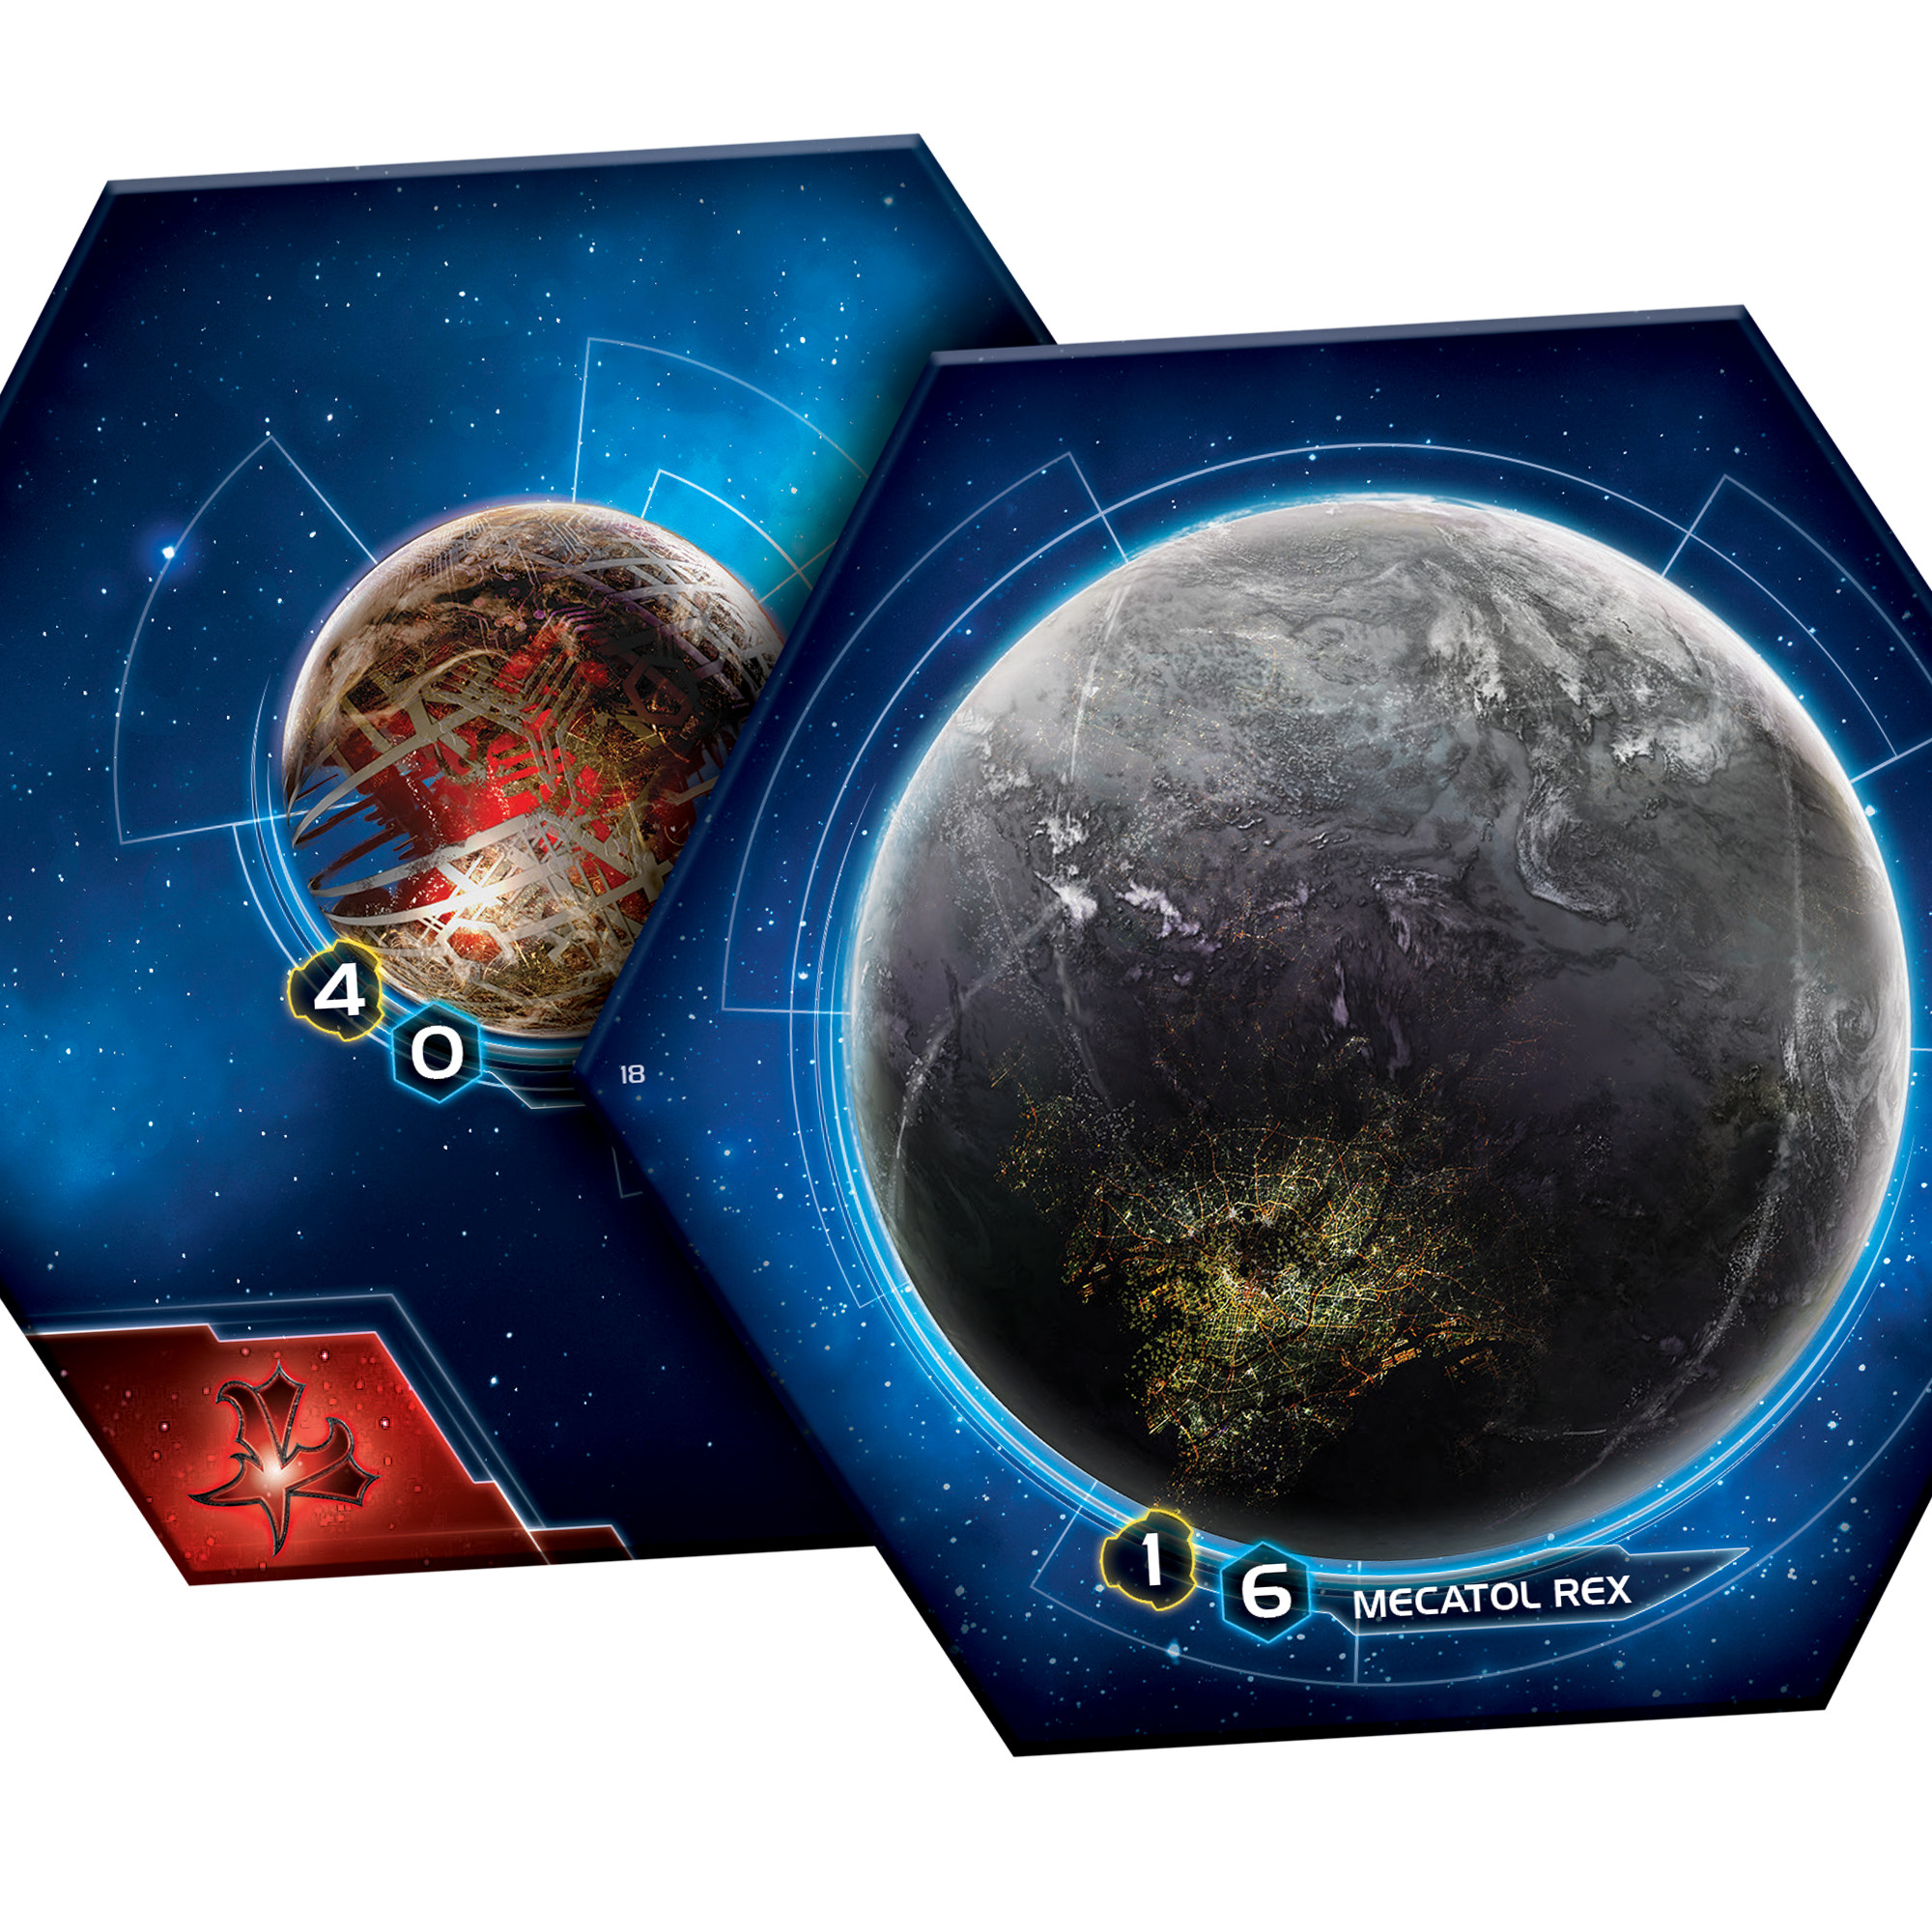 Twilight Imperium: 4th Edition Strategy Board Game for ages 14 and up, from Asmodee - image 5 of 6